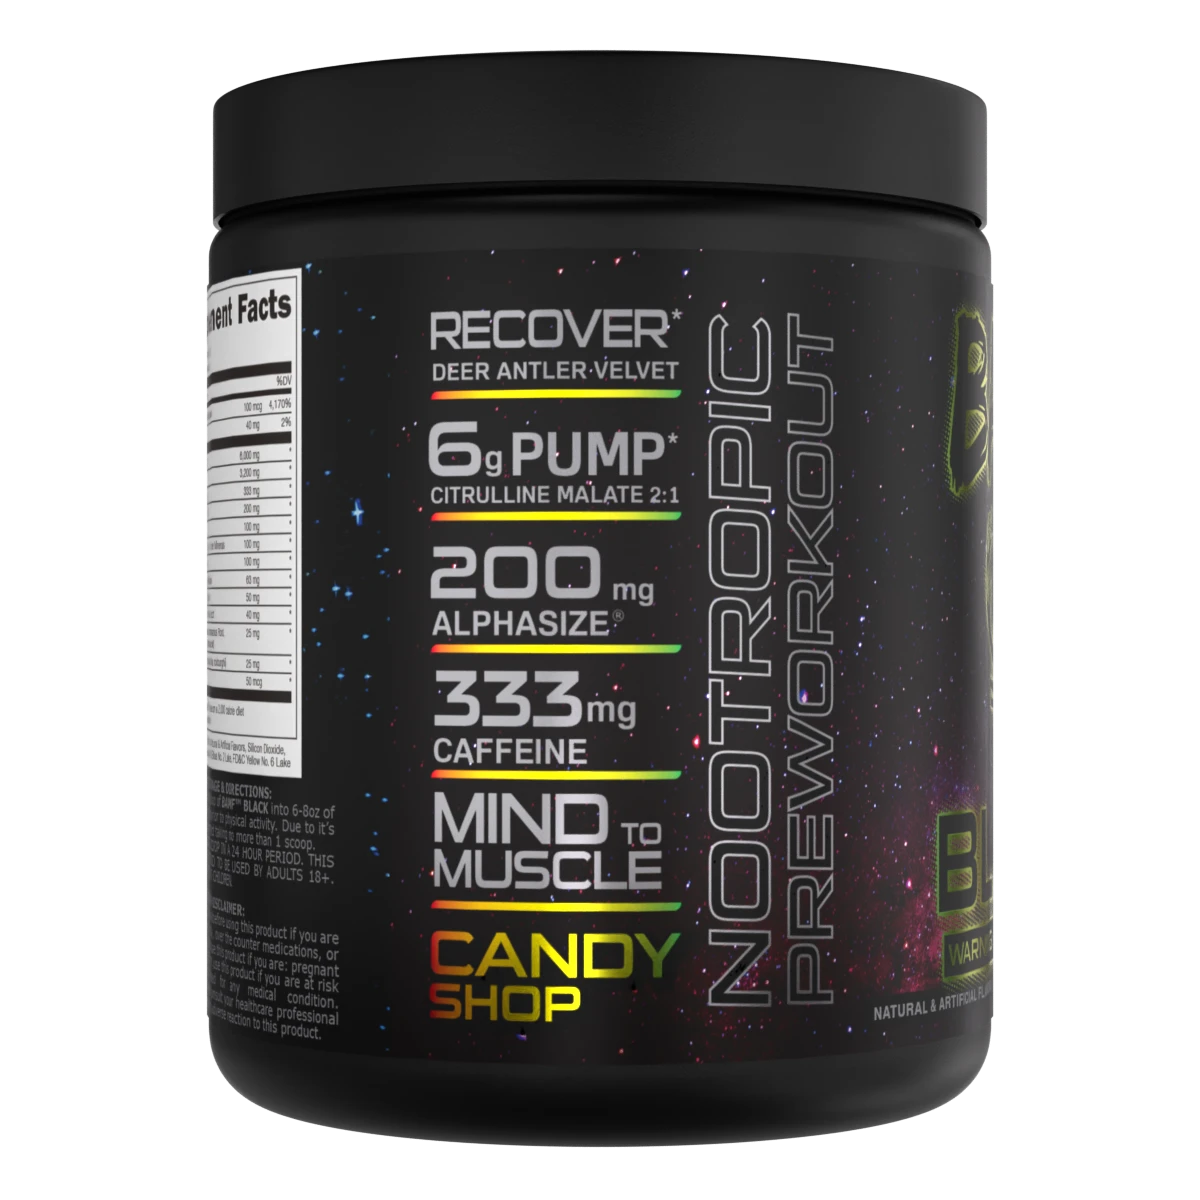 BAMF BLACK - High Stimulant Nootropic Pre-Workout-Bucked Up